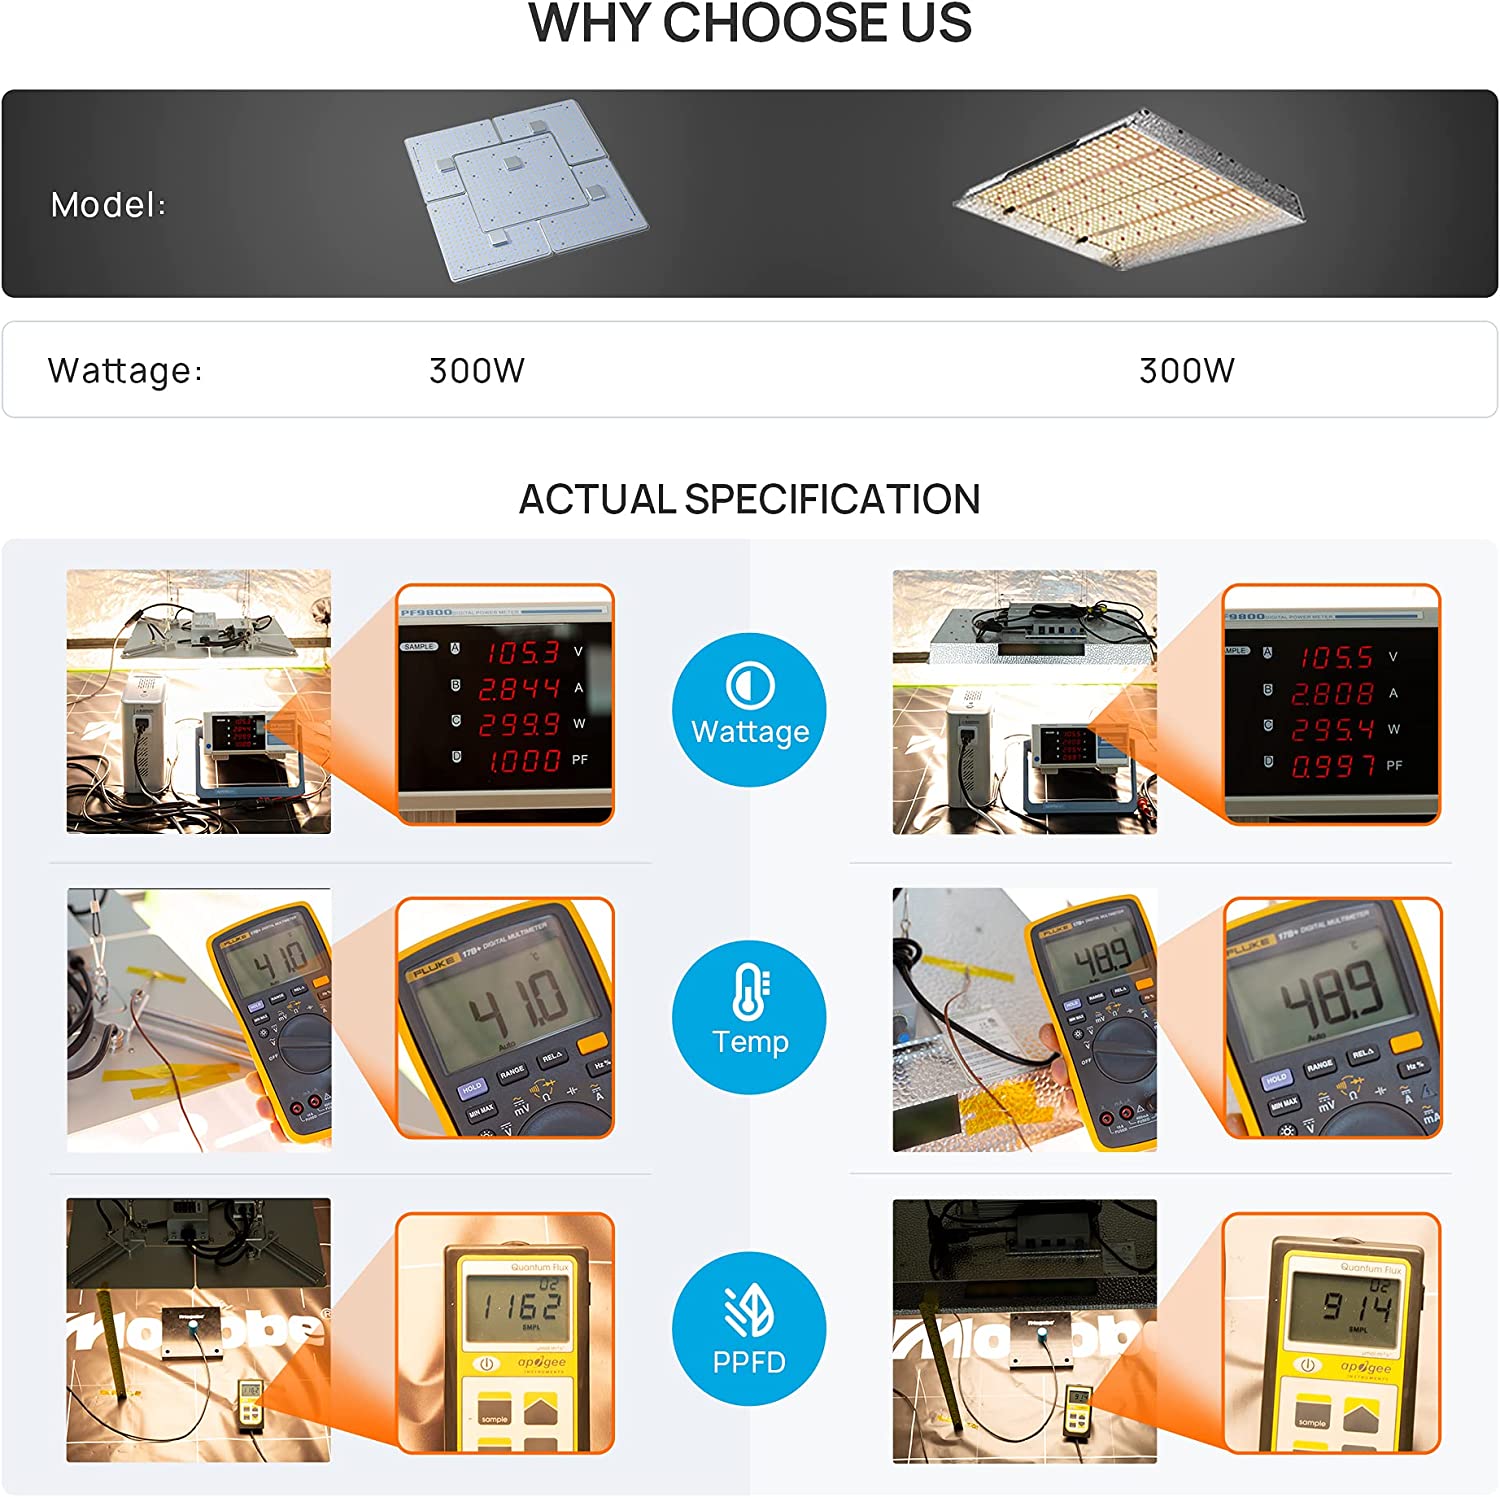 comparison of temperature, wattage and PPFD with other branded 300w led grow light product 